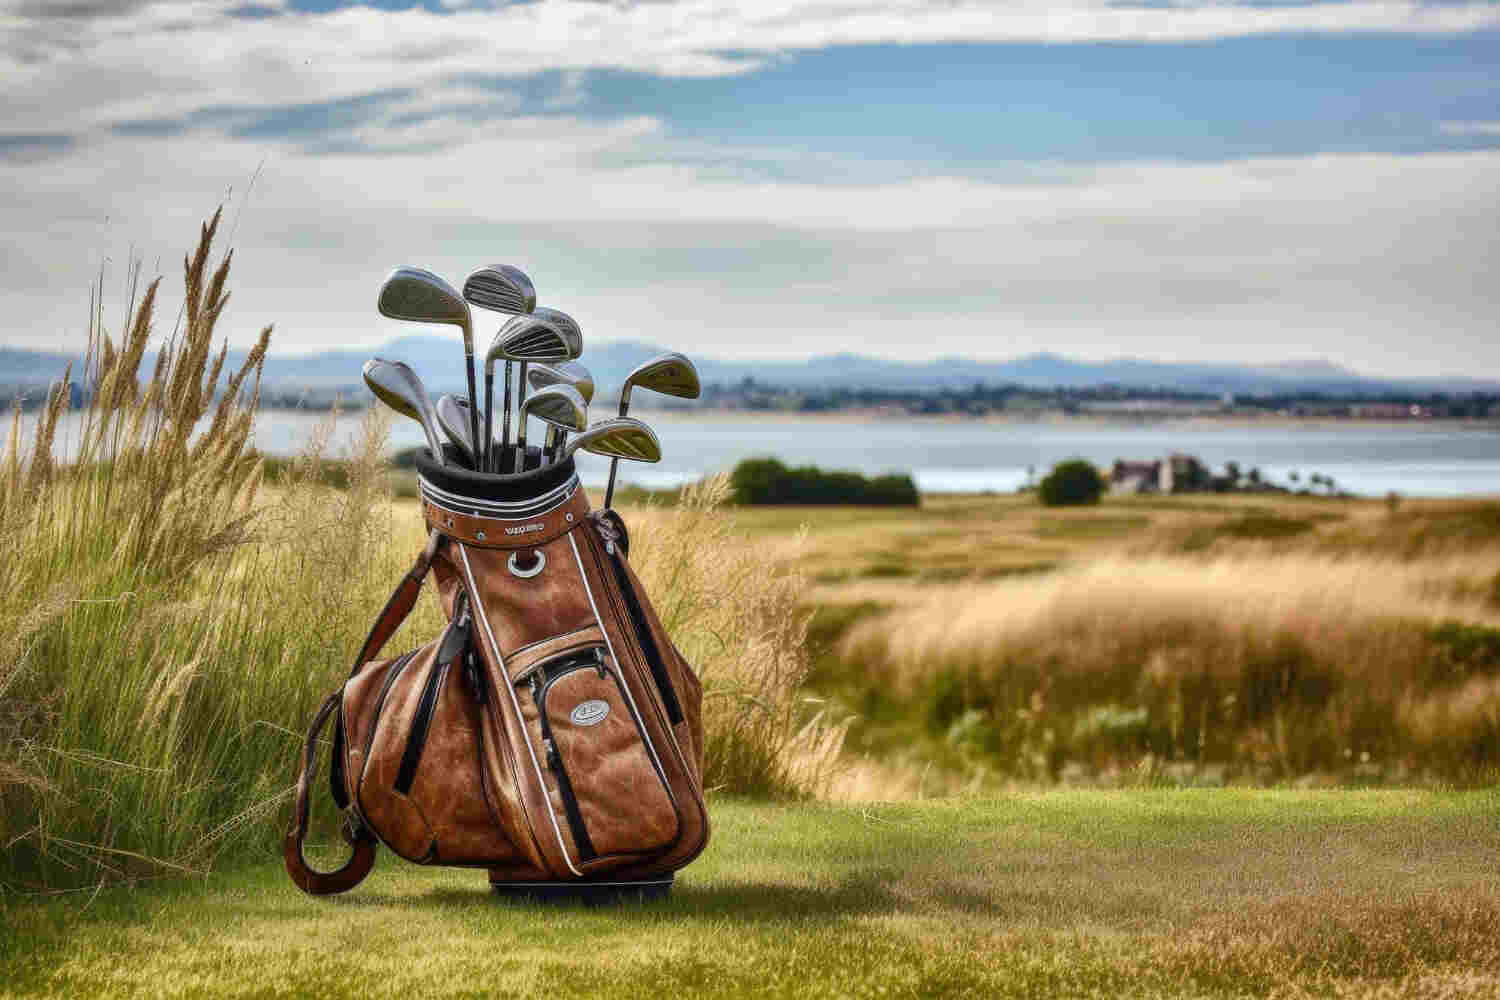 where are golf bags made